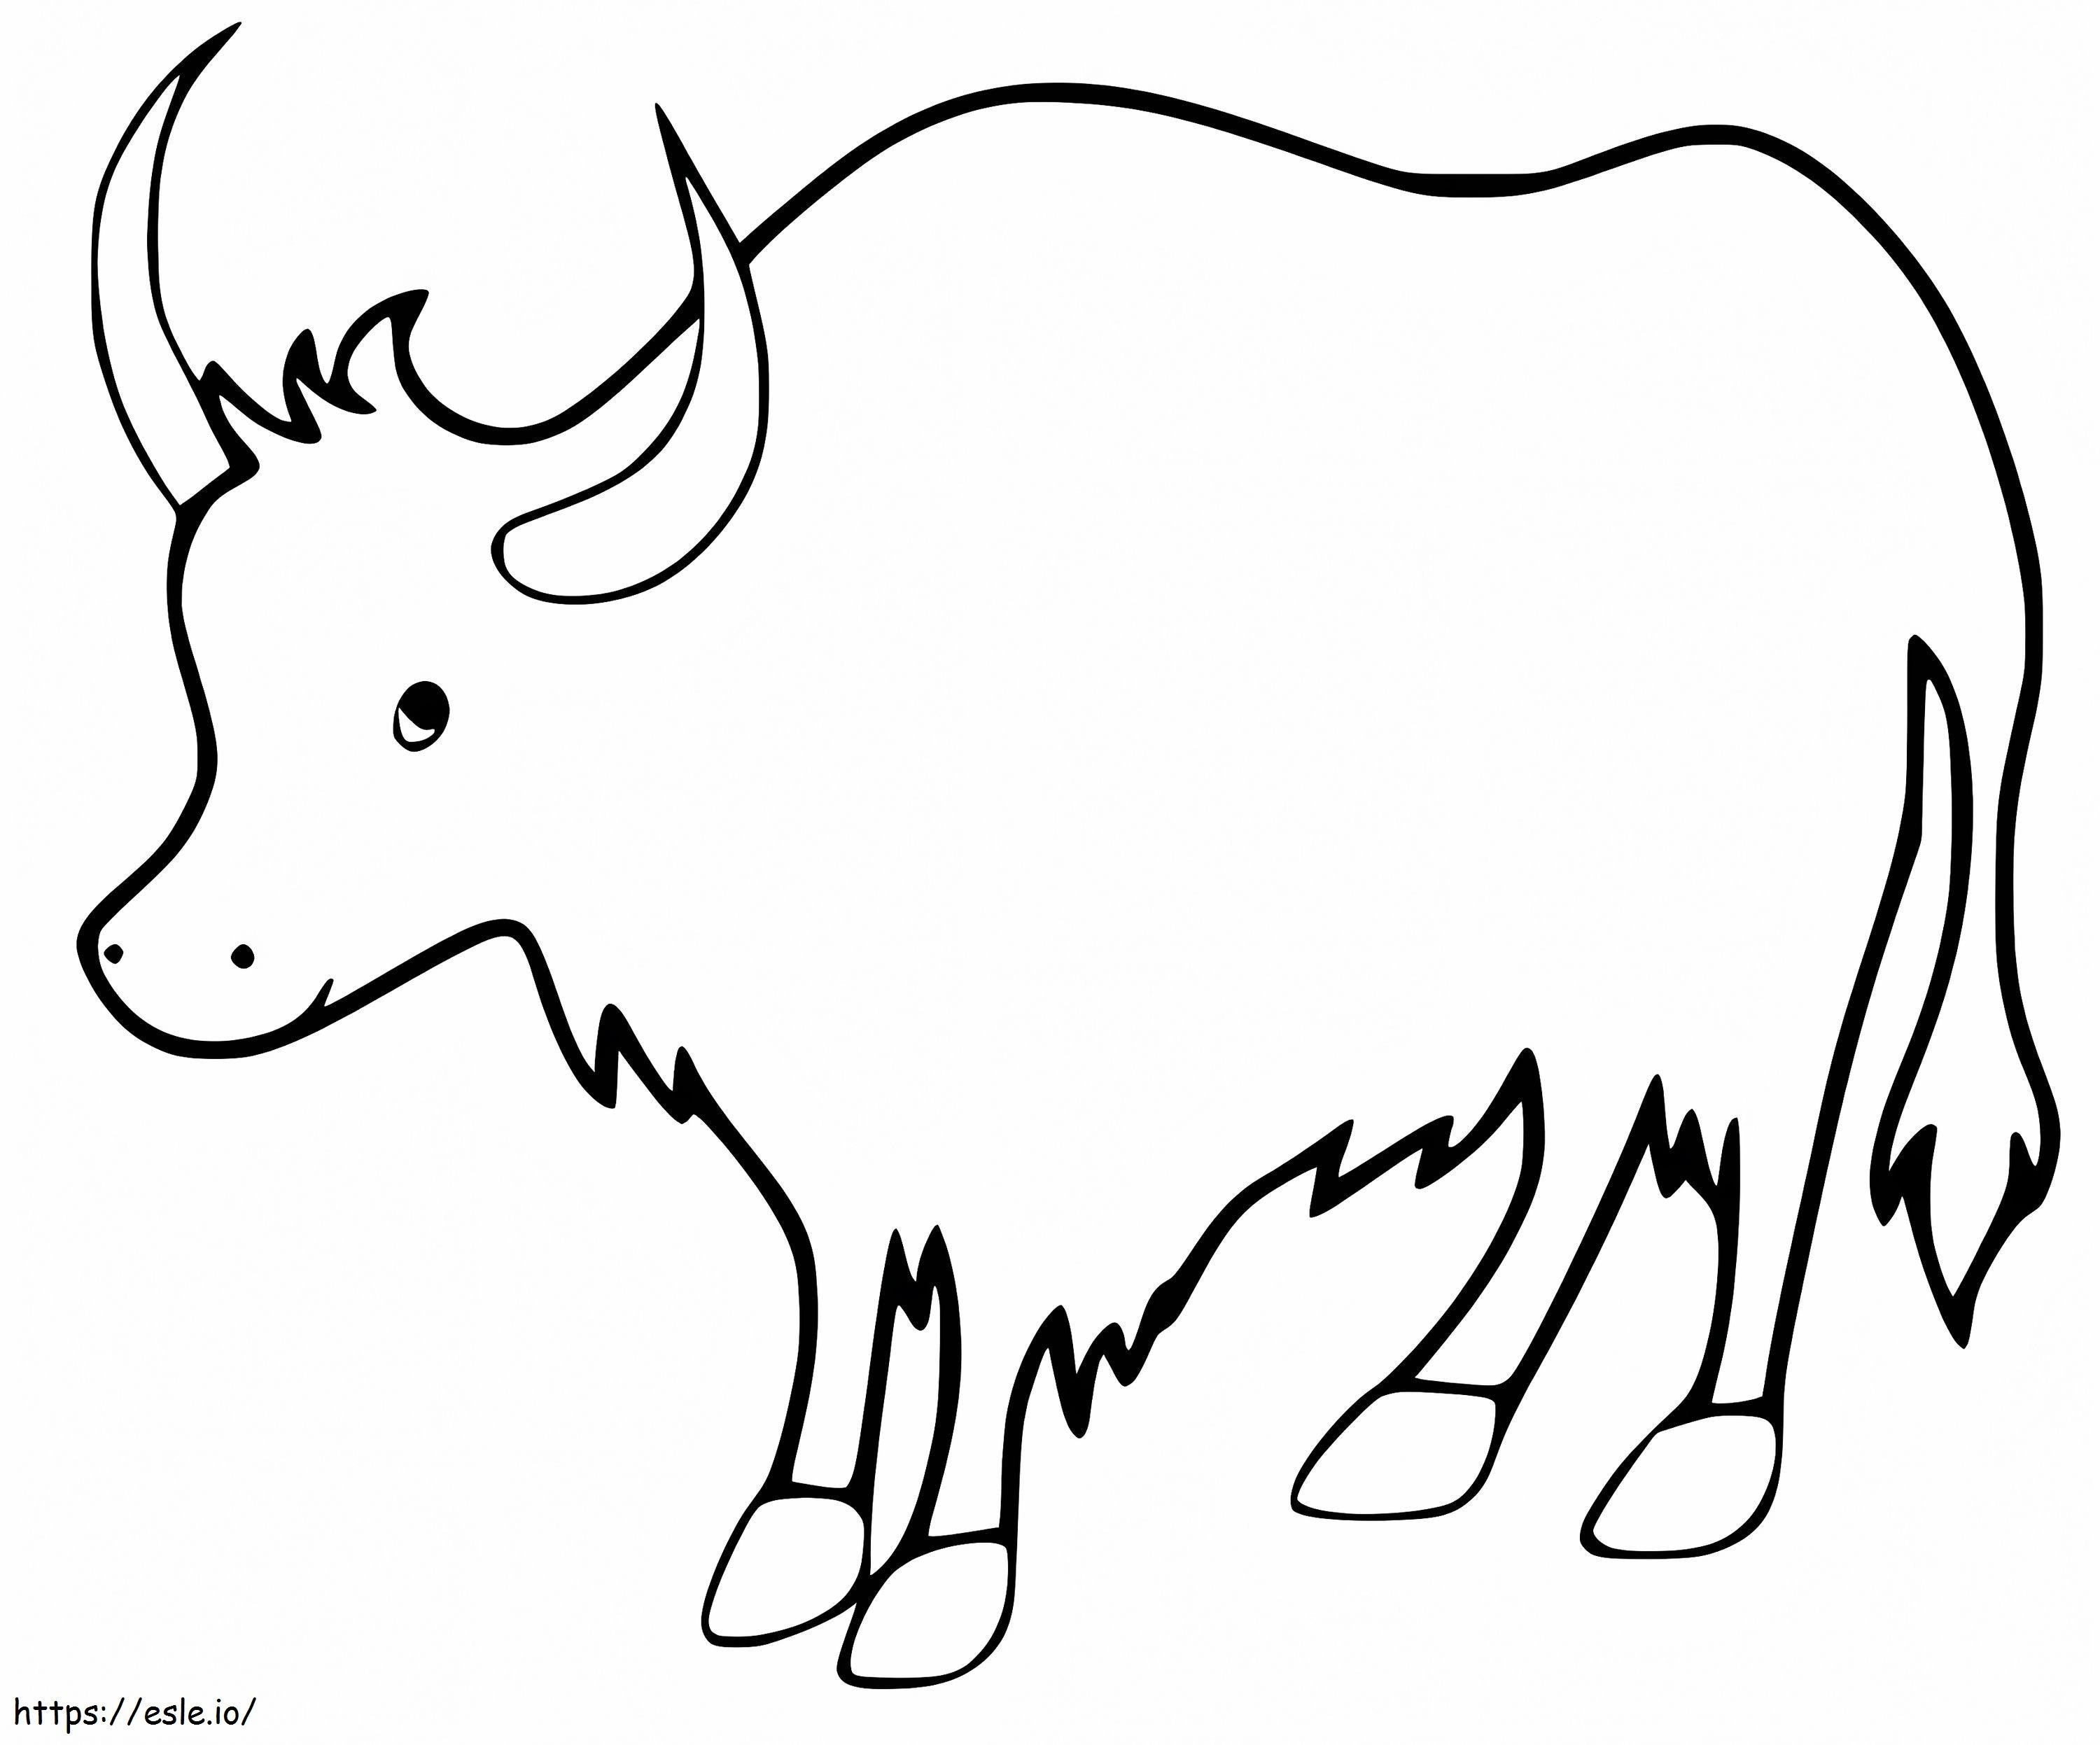 Free Ox coloring page